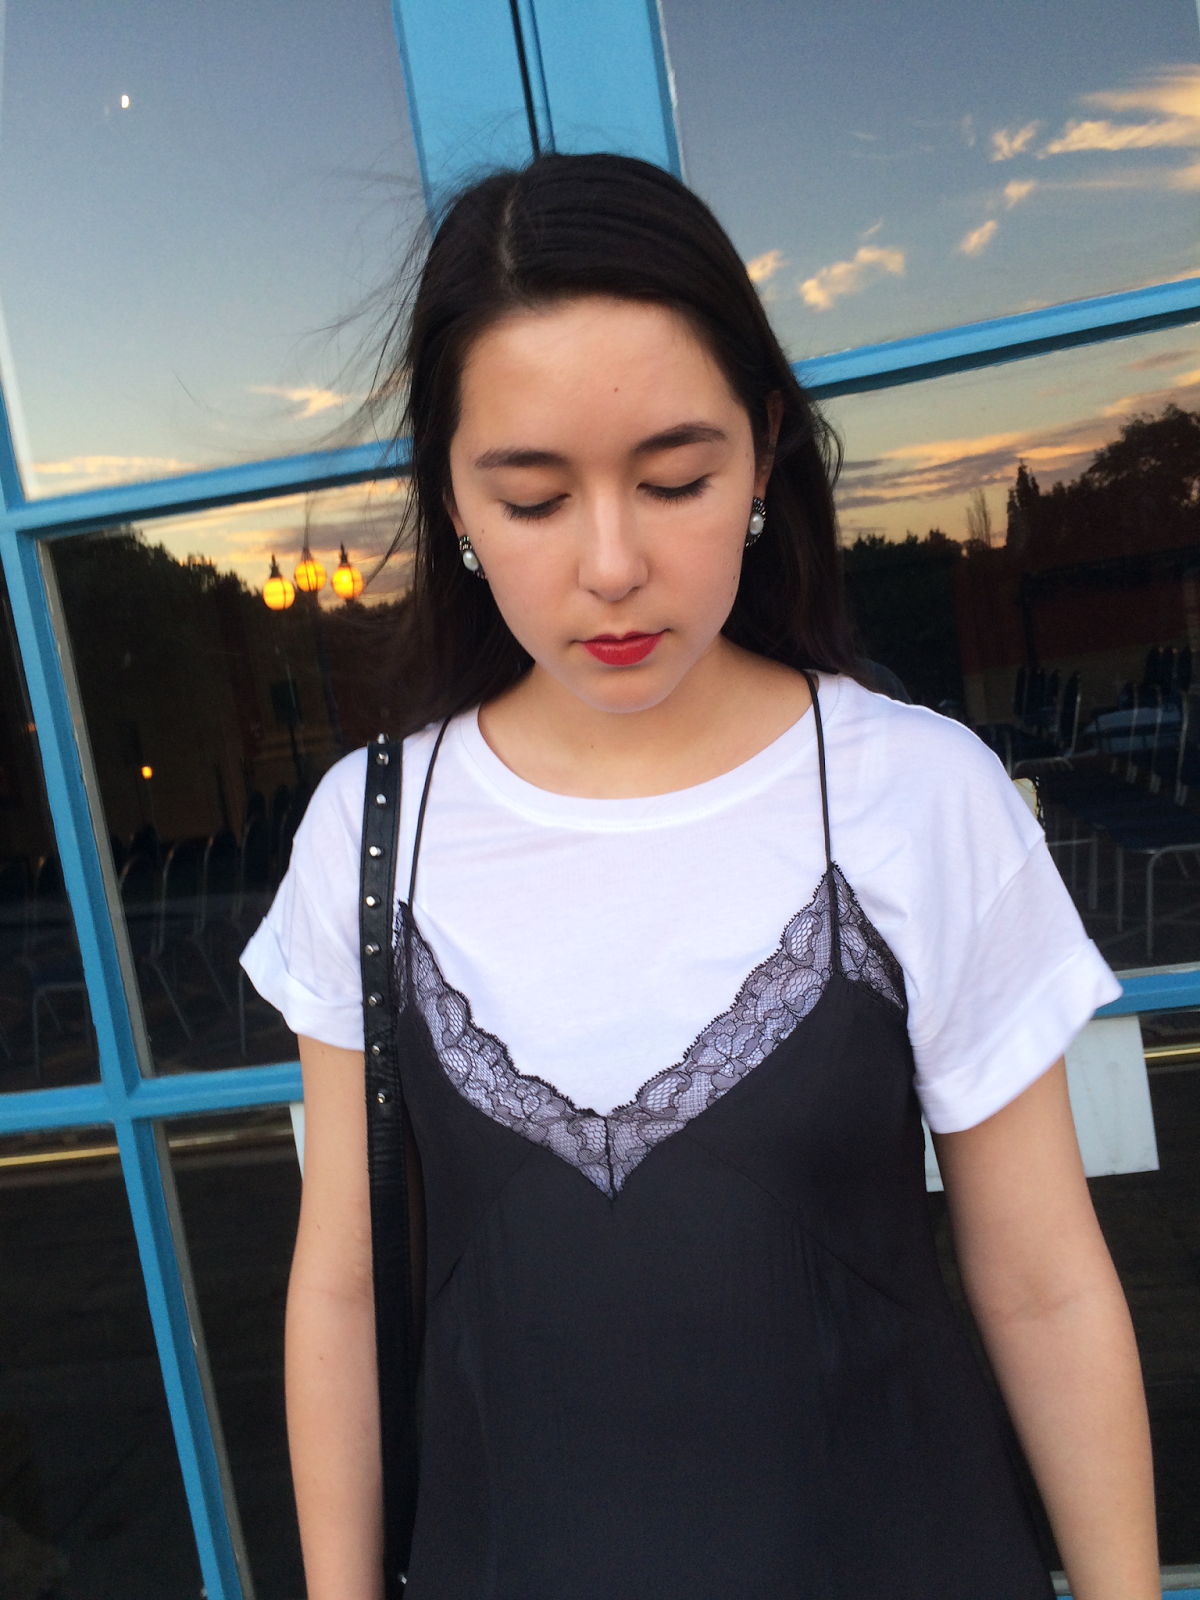 fashion blogger, outfit post, ootd, ootn, lace black slip dress, white t-shirt, earrings, lipstick, ally pally